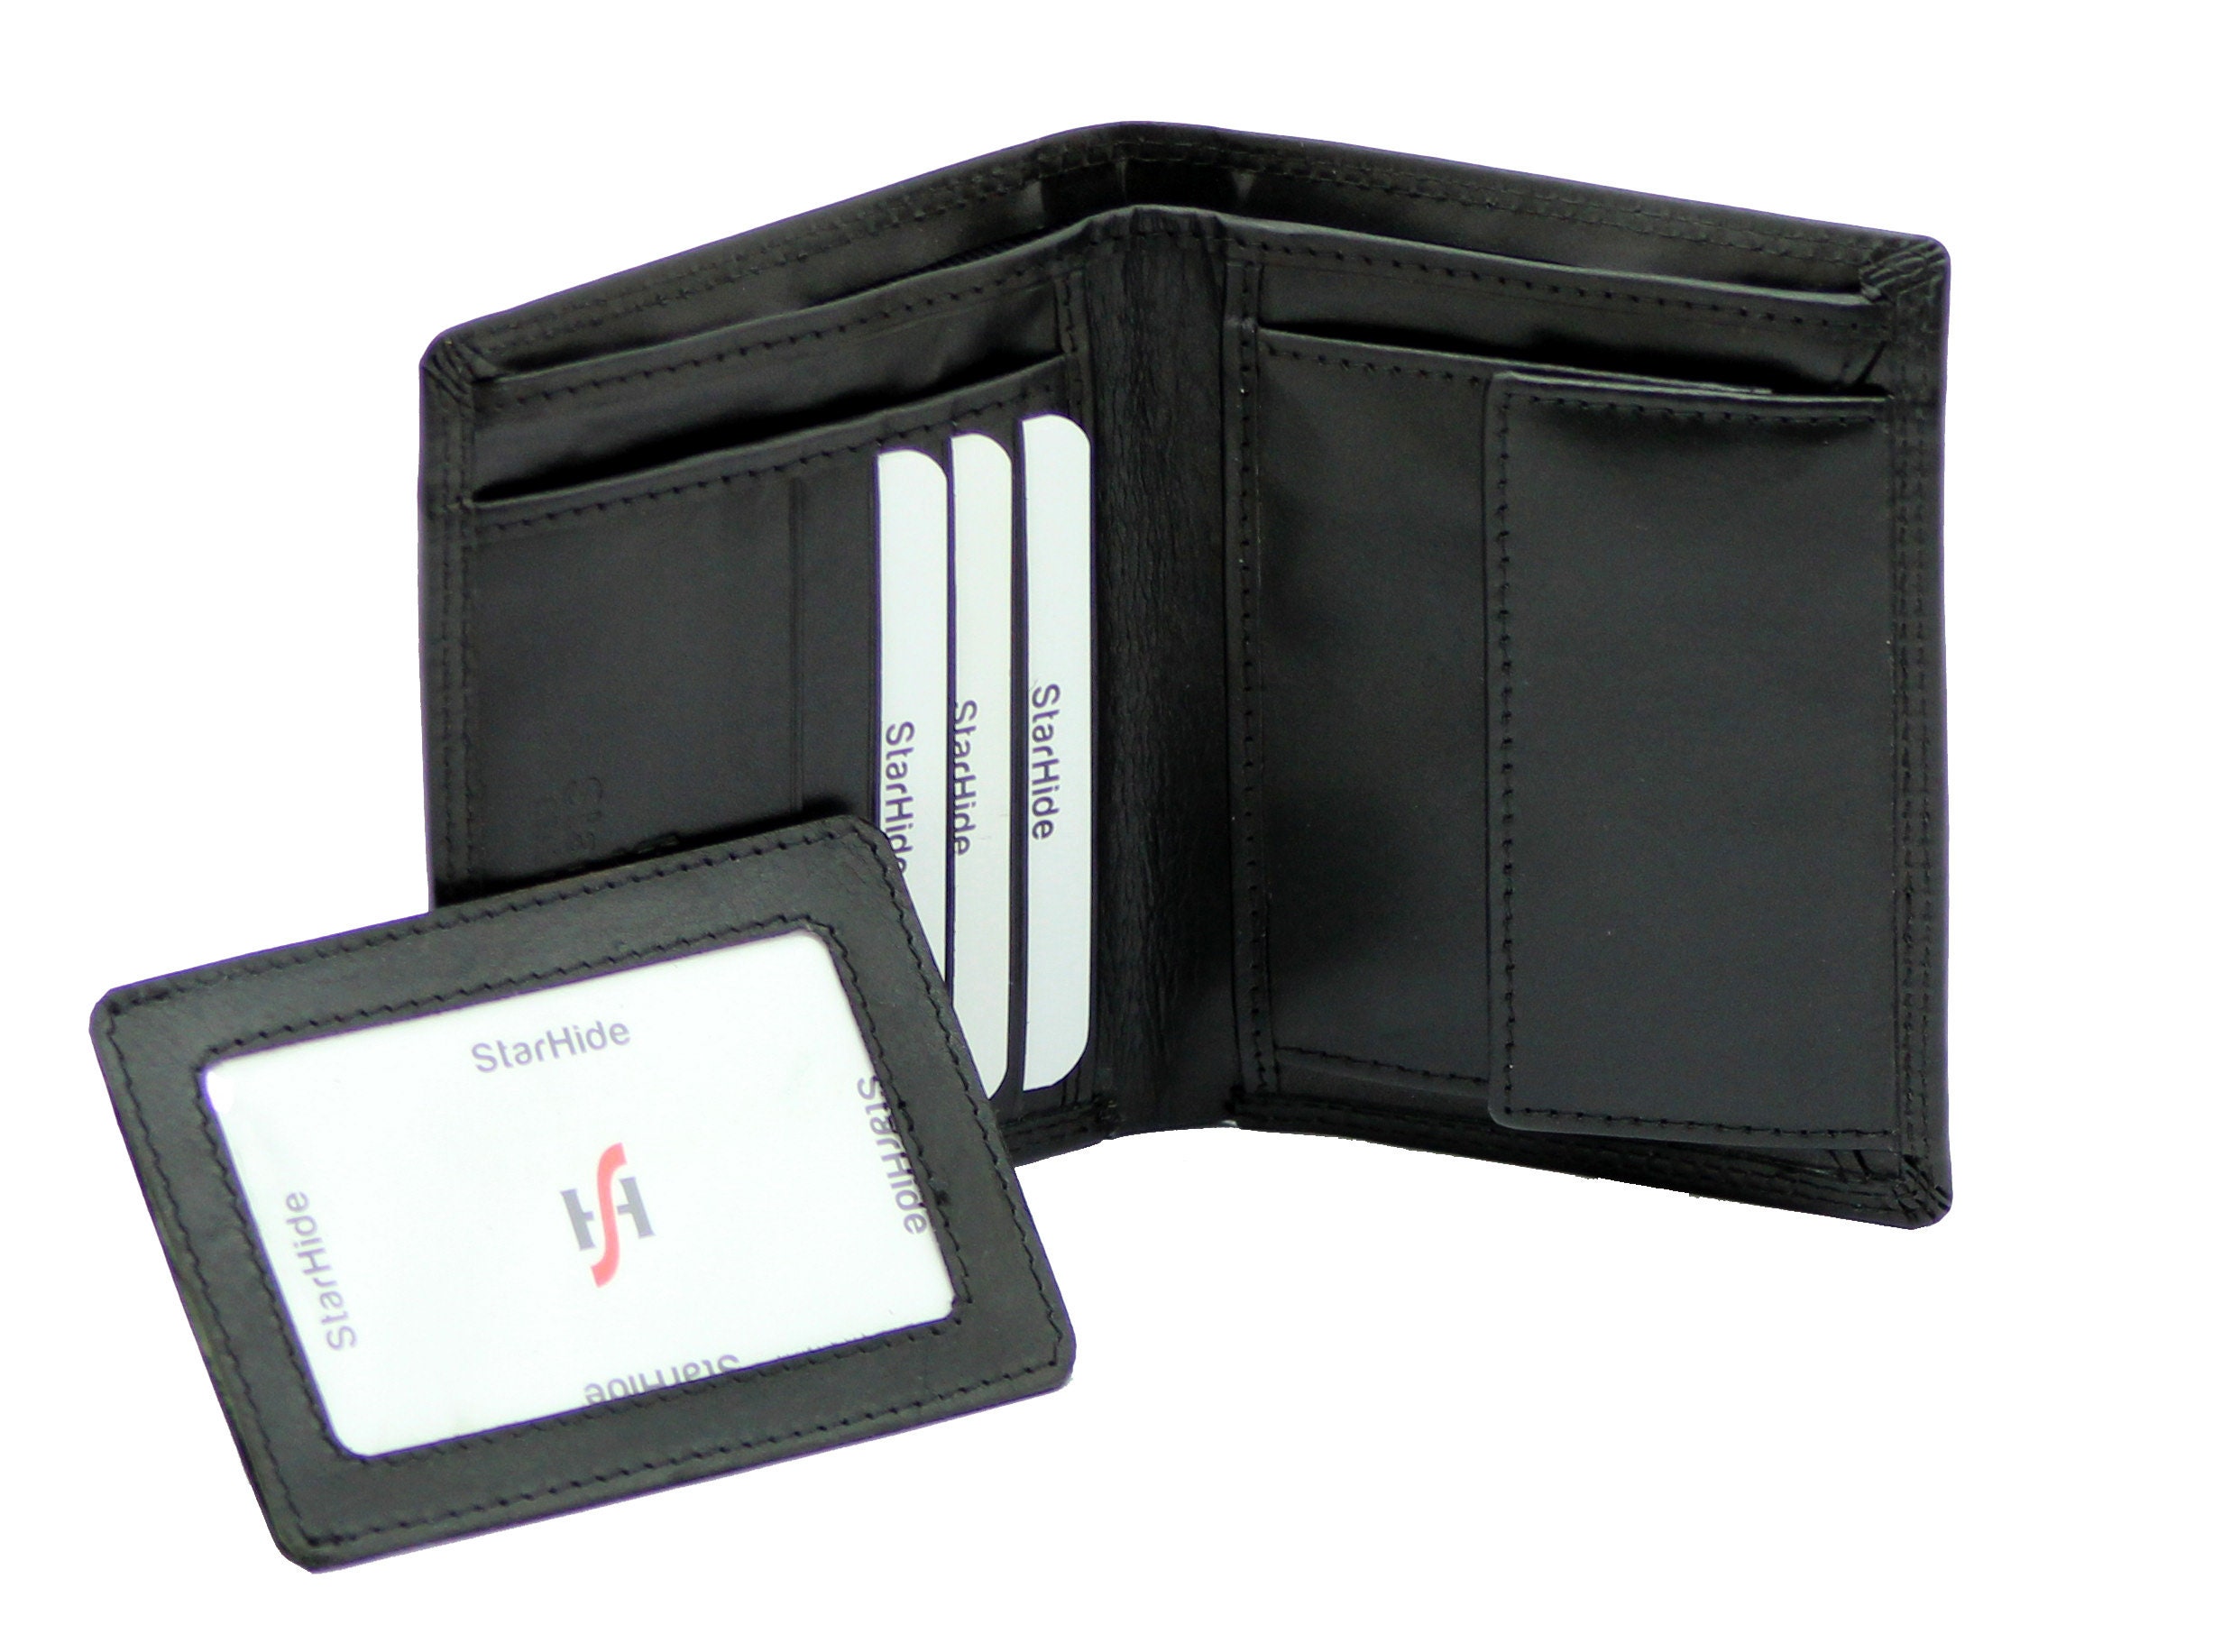 WALLET Removable Coin Pouch - Black